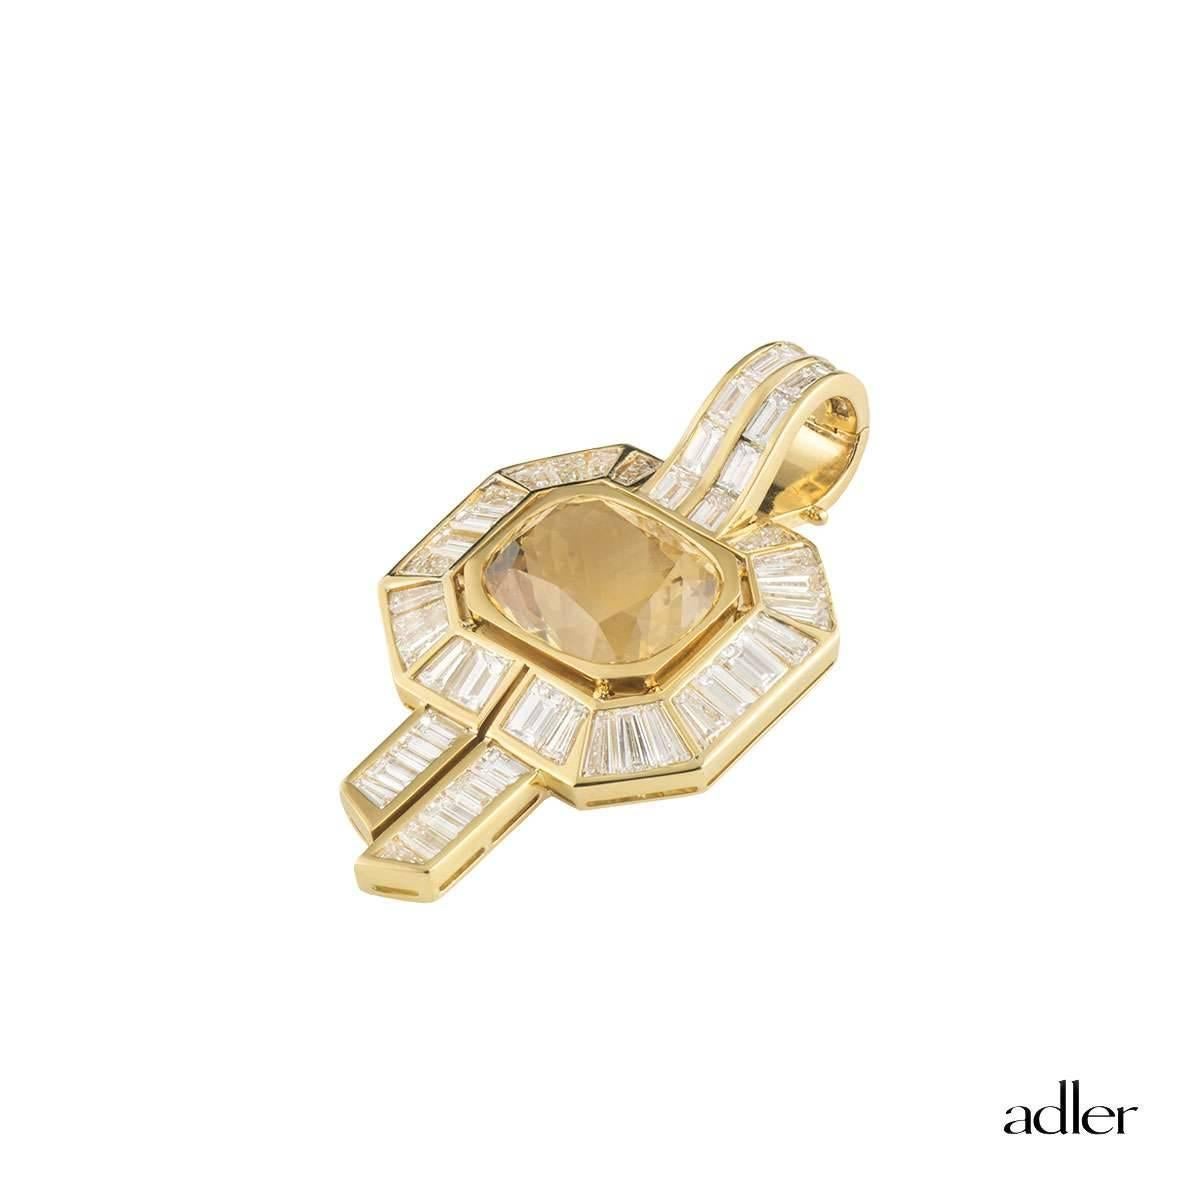 A substantial 18k yellow gold diamond and citrine Adler pendant. The pendant comprises of a cushion cut citrine approximately 12ct with a yellowish-brown hue throughout. Complementing the pendant are a halo of baguette cut diamond with 2 columns in